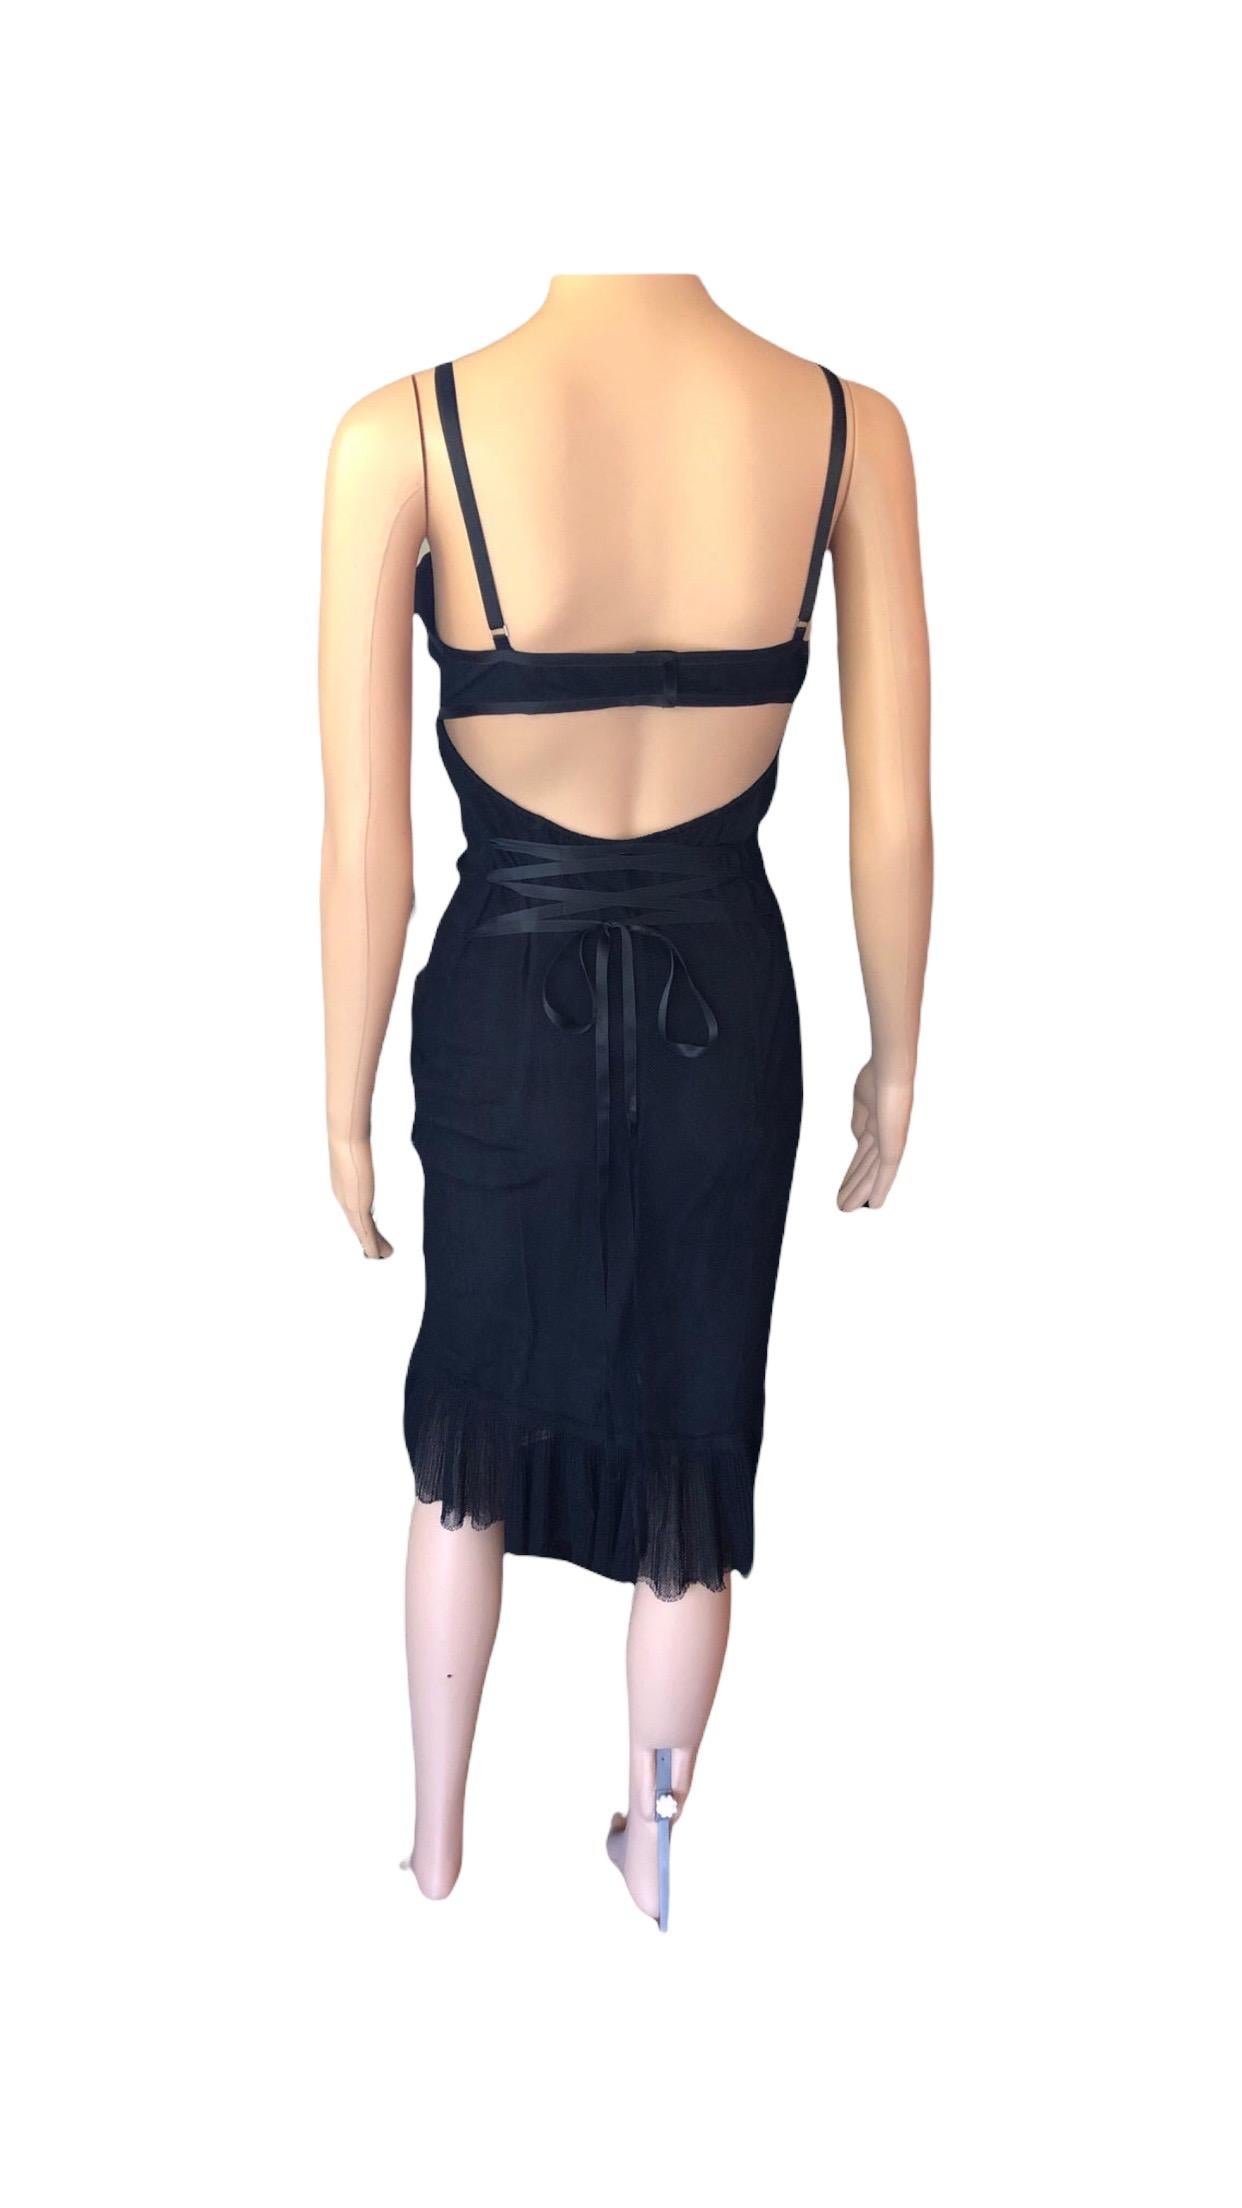 Gucci by Tom Ford F/W 2001 Cutout Back Mesh Black Dress For Sale 4